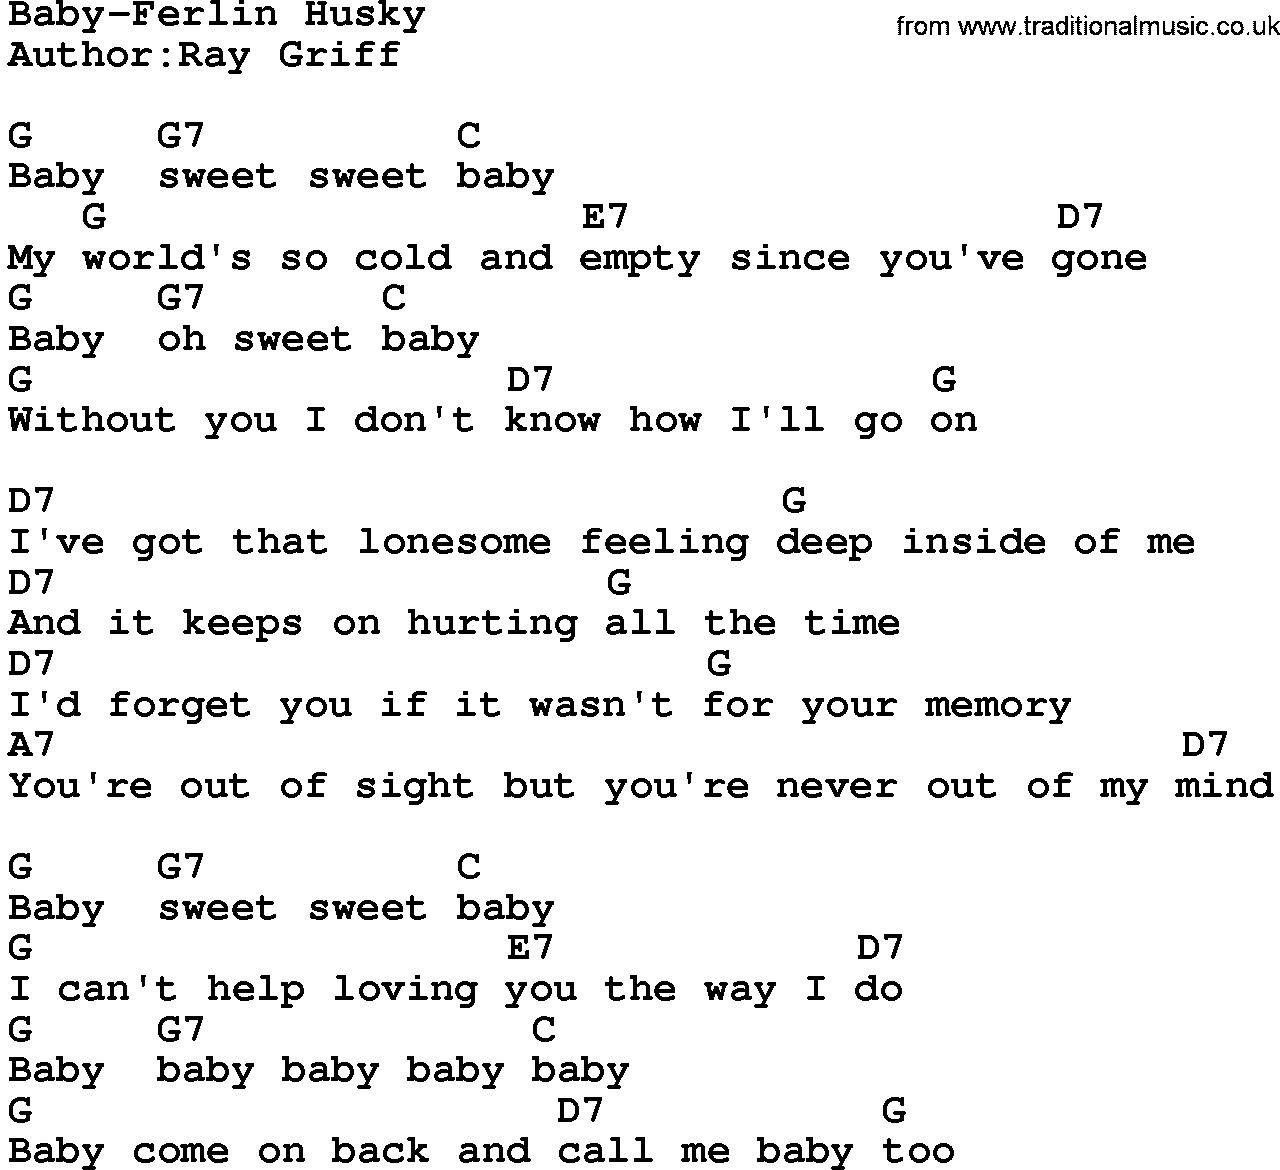 Country music song: Baby-Ferlin Husky lyrics and chords